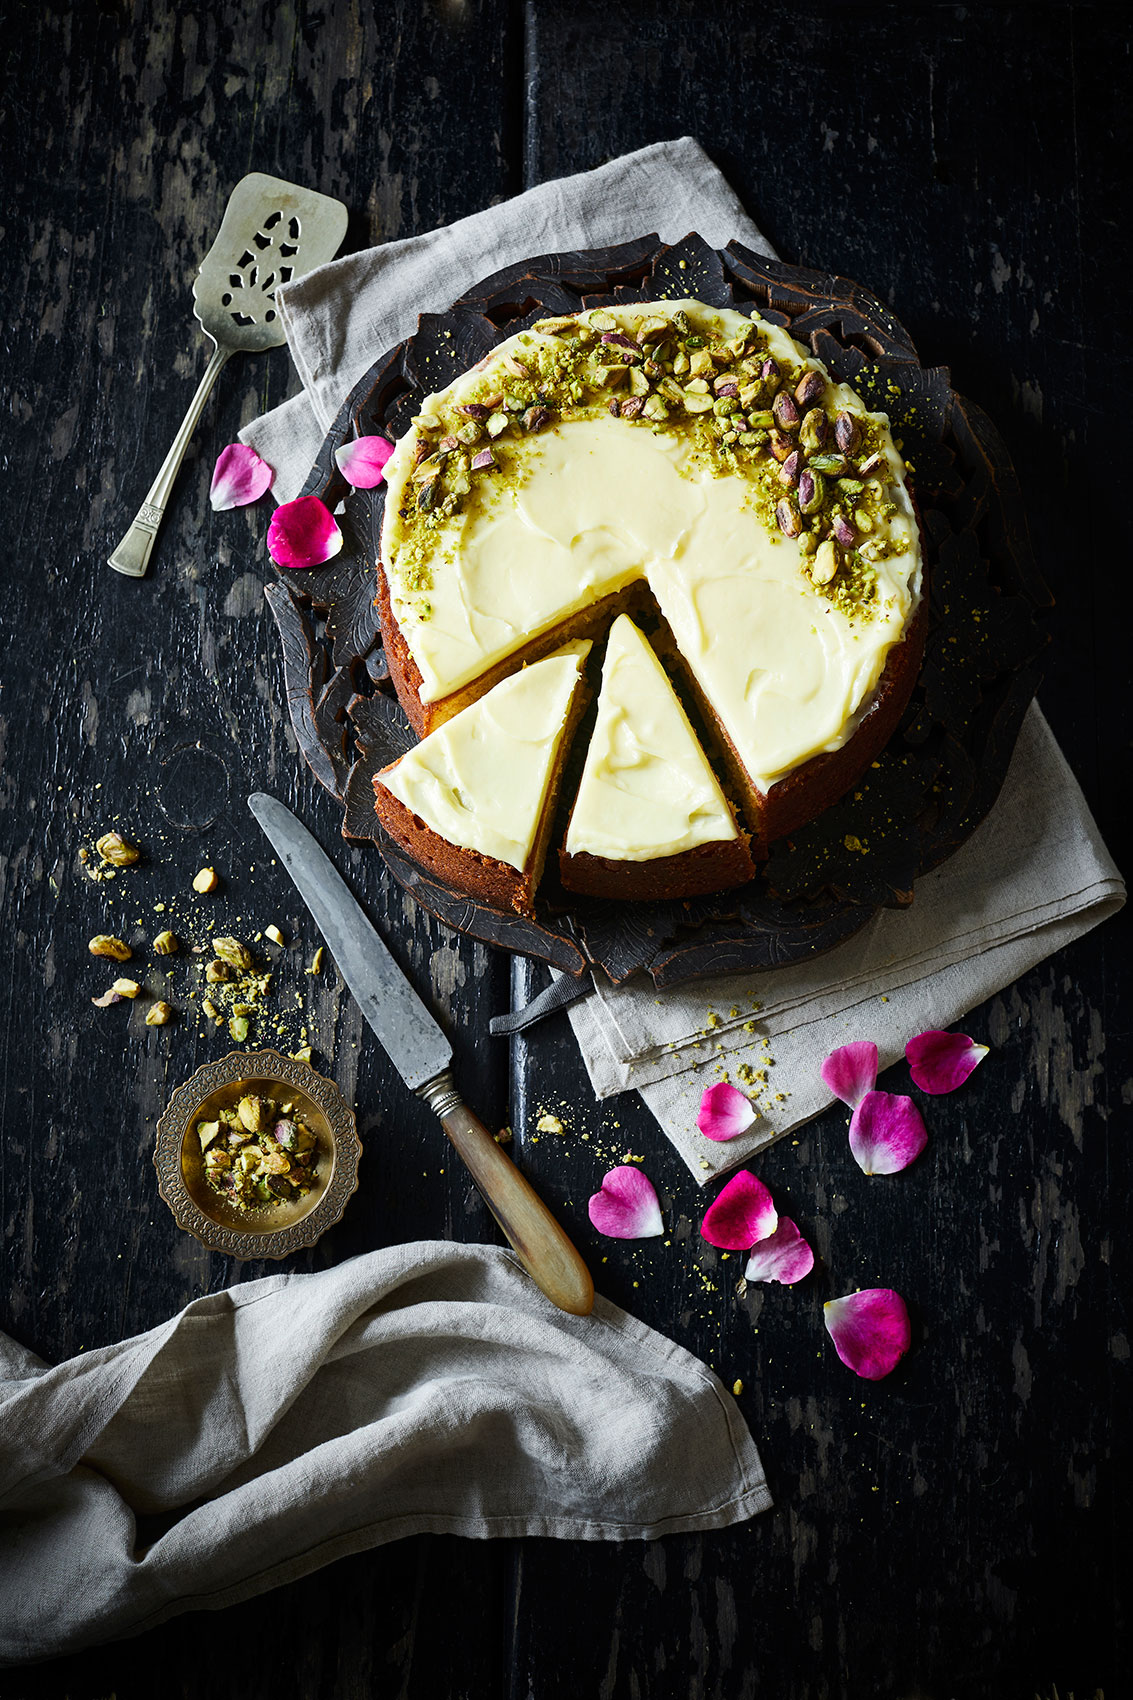 My Indian Kitchen • Cardamom Cake with Pistachio & Flower Petals • Cookbook & Editorial Food Photography